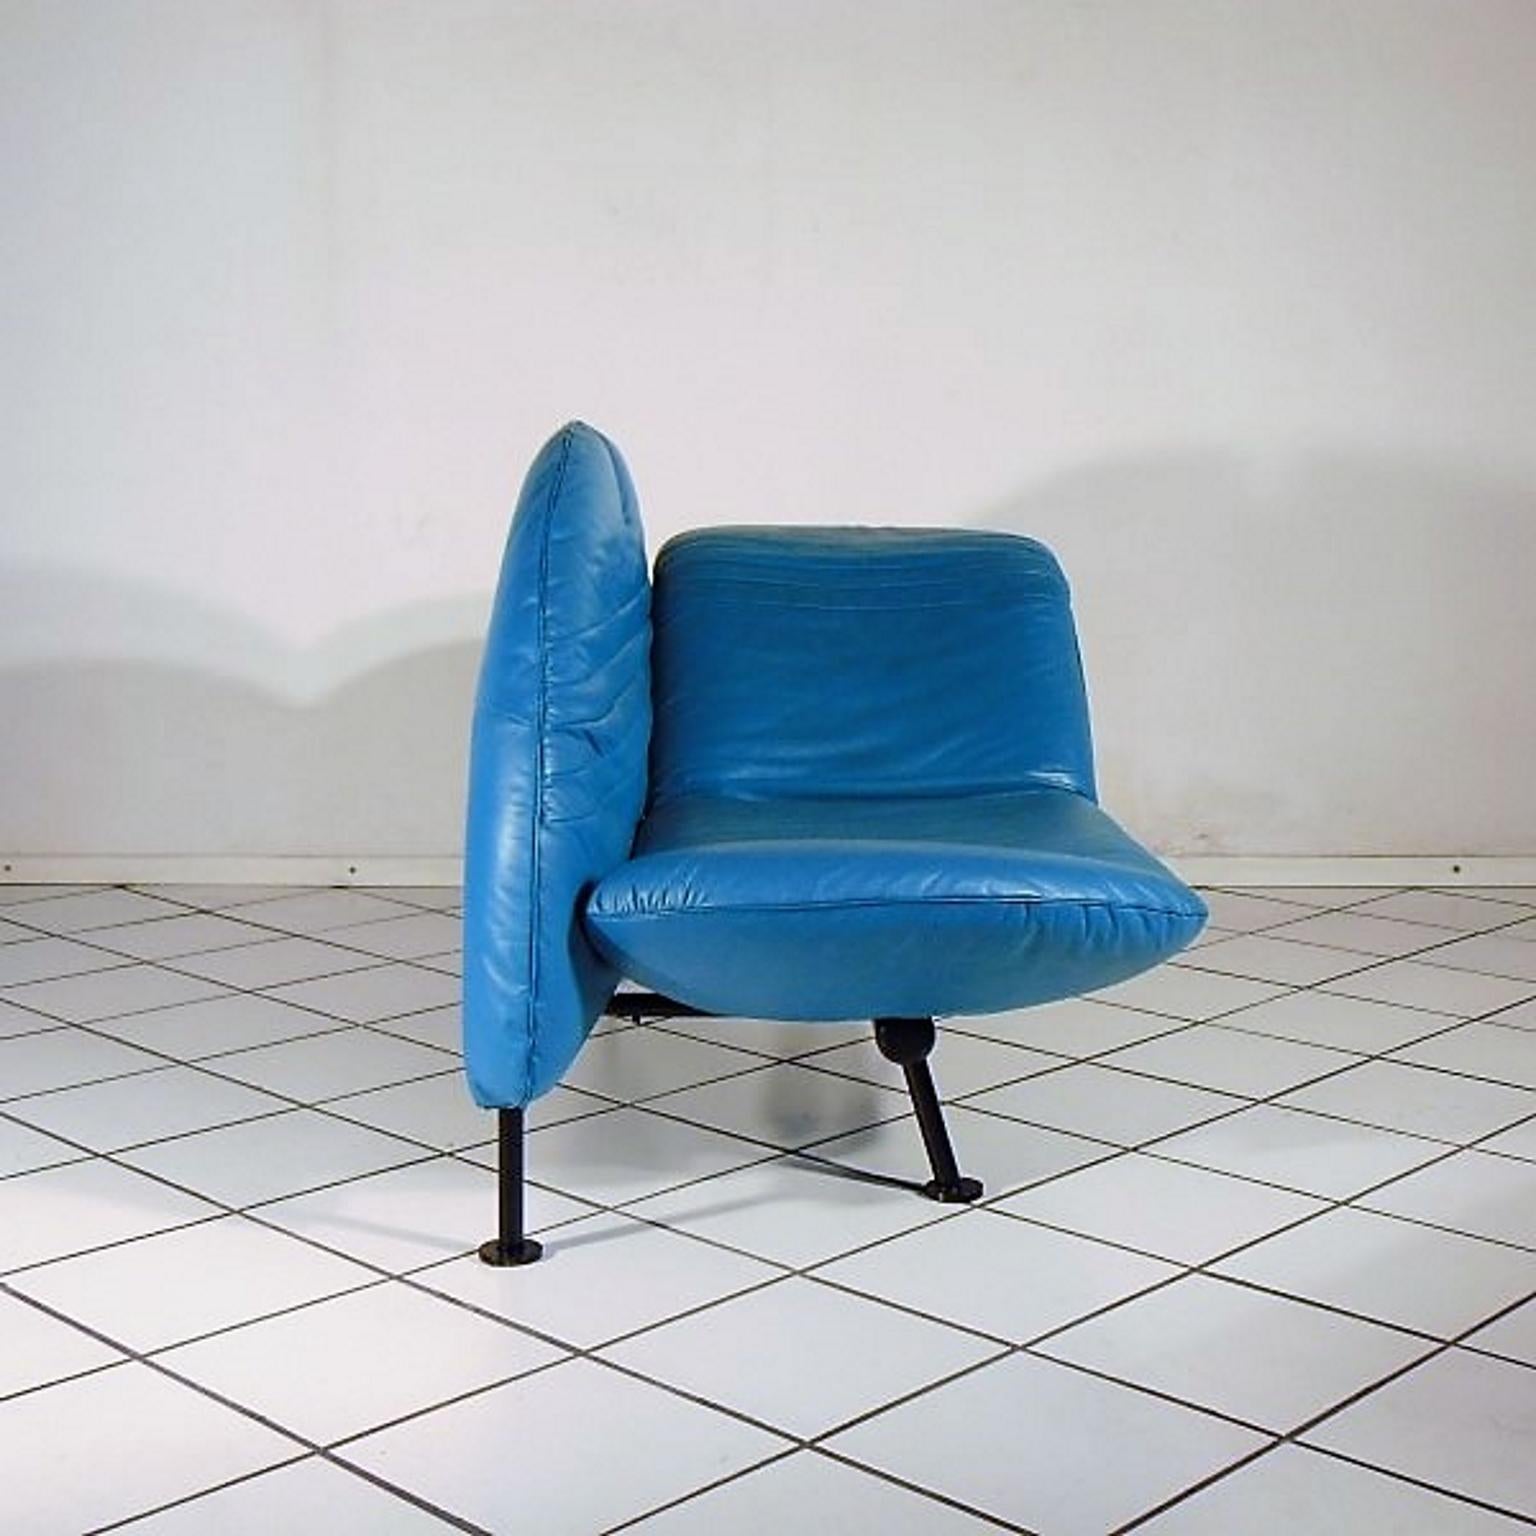 1980s Adjustable Loveseat Turquoise Leather by Walter Leeman for Sormani, Italy For Sale 5